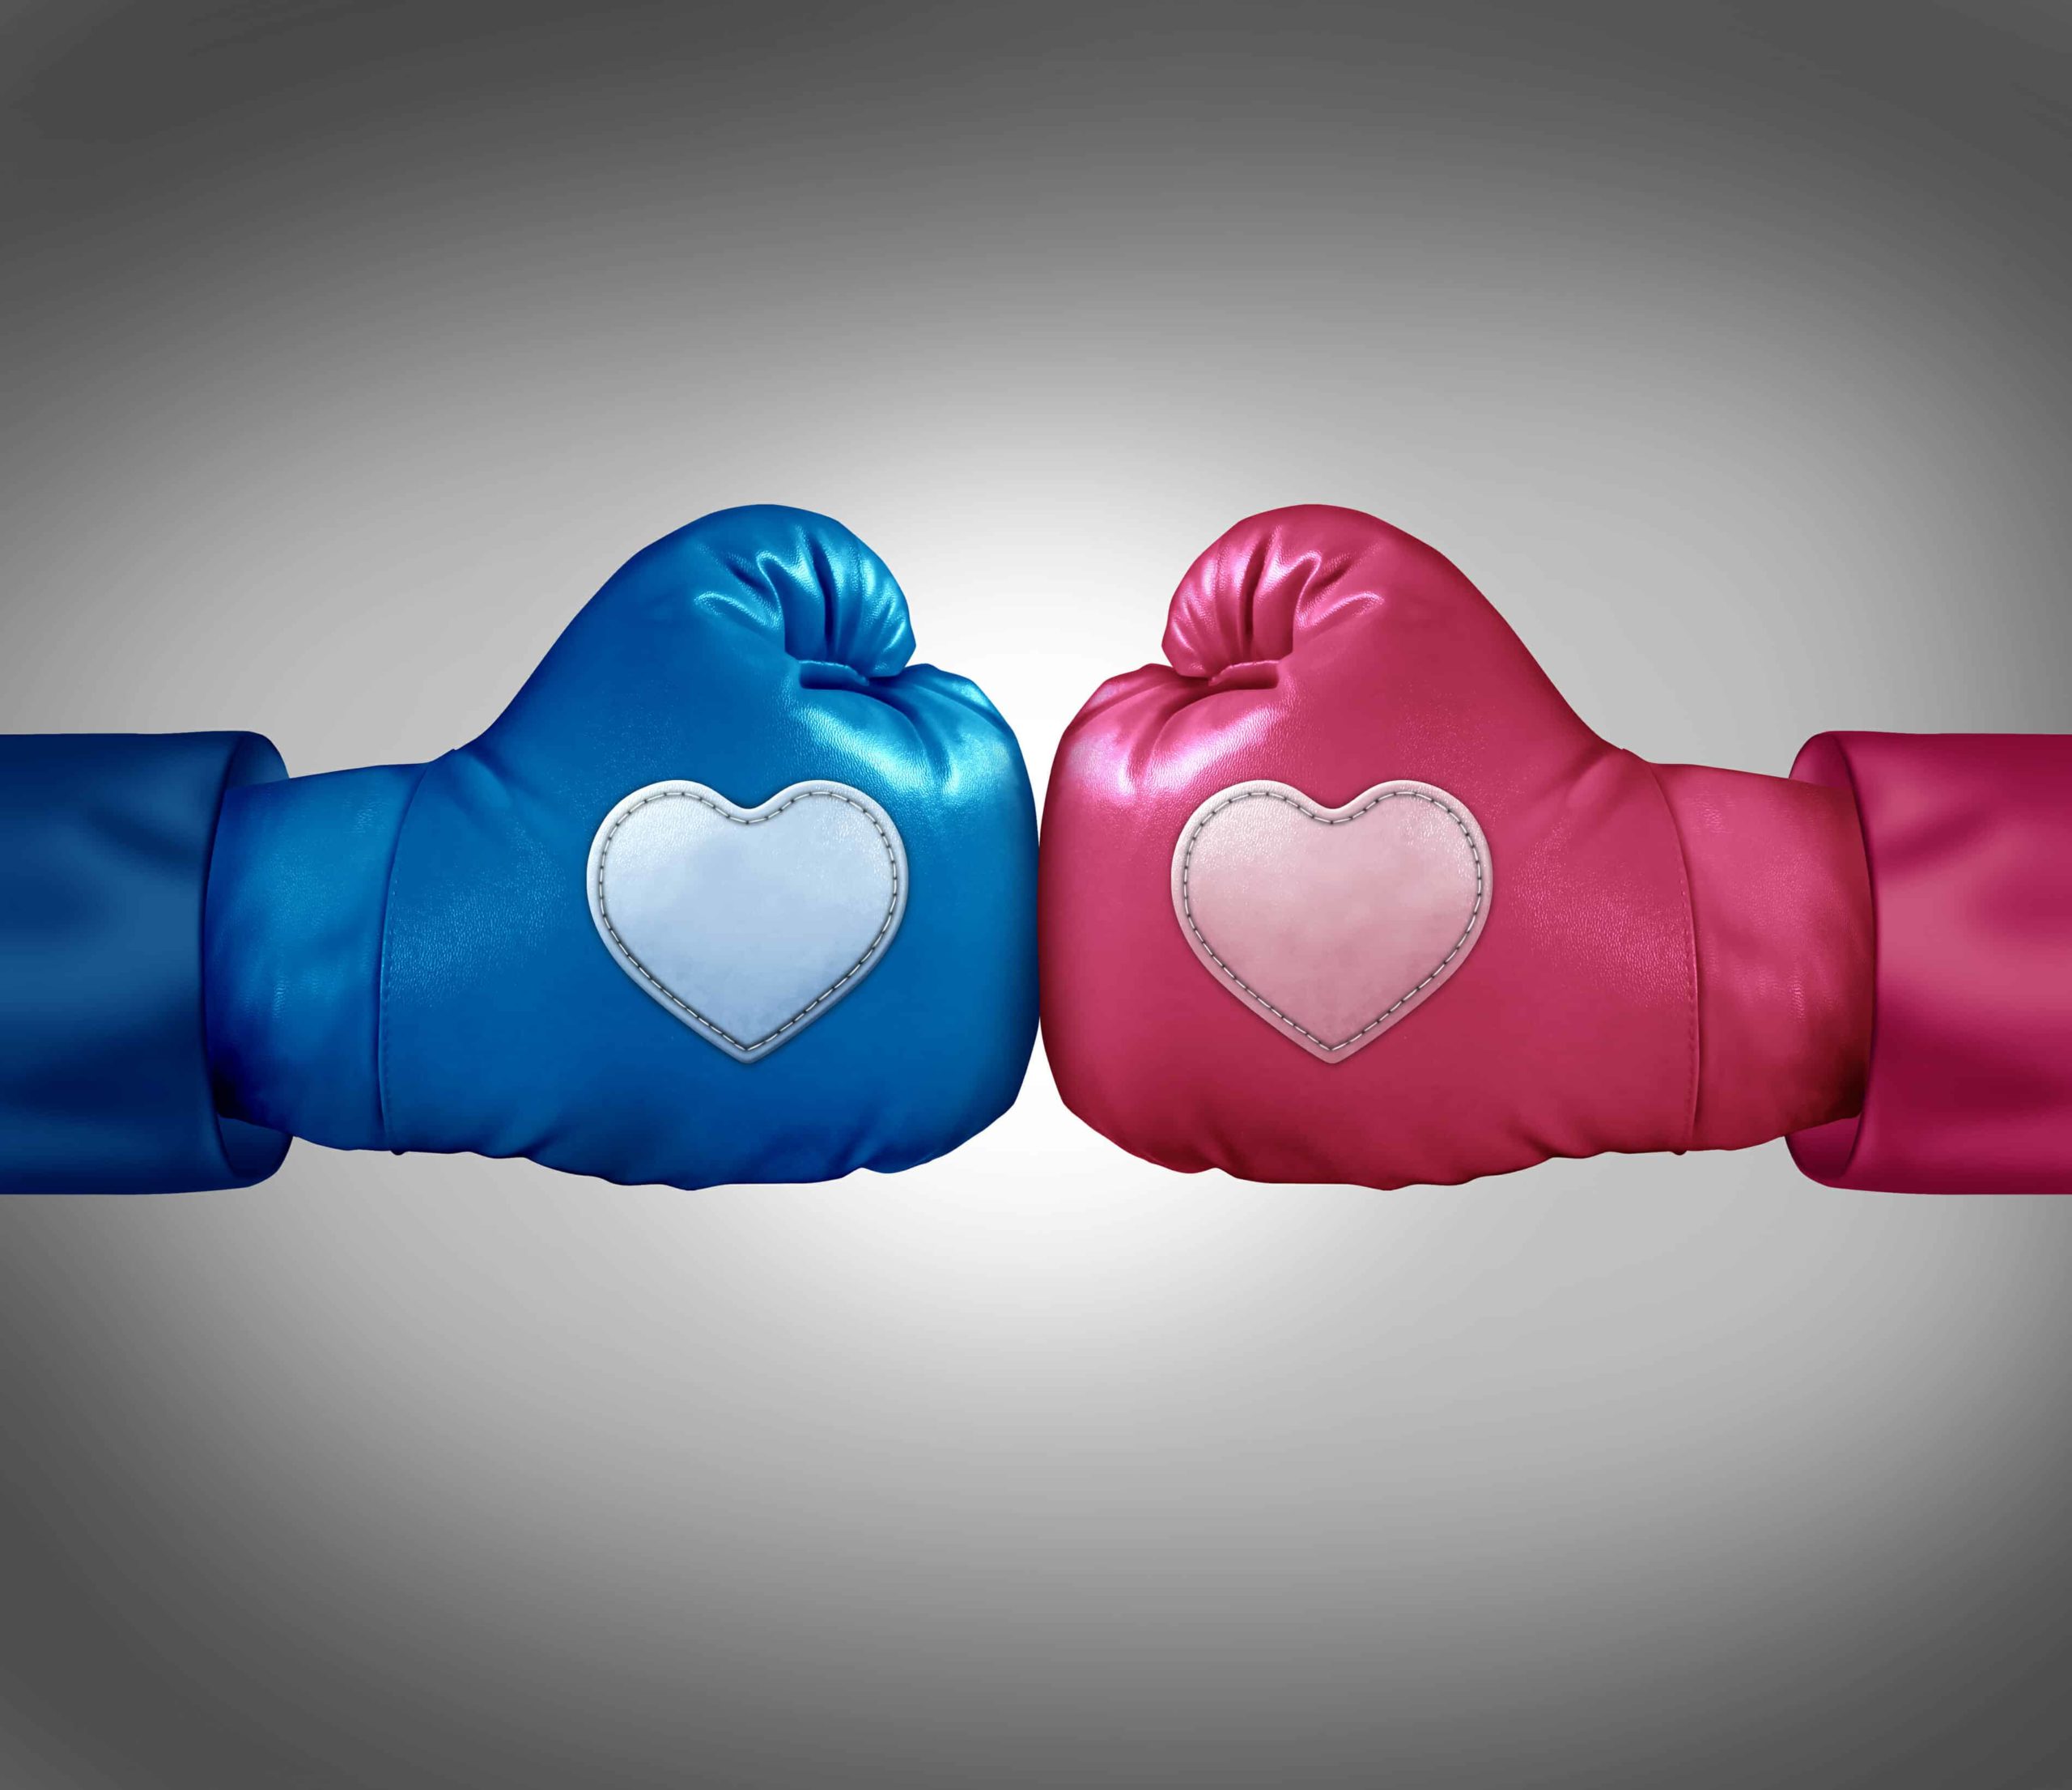 Blue and pink boxing gloves with hearts on them facing off.